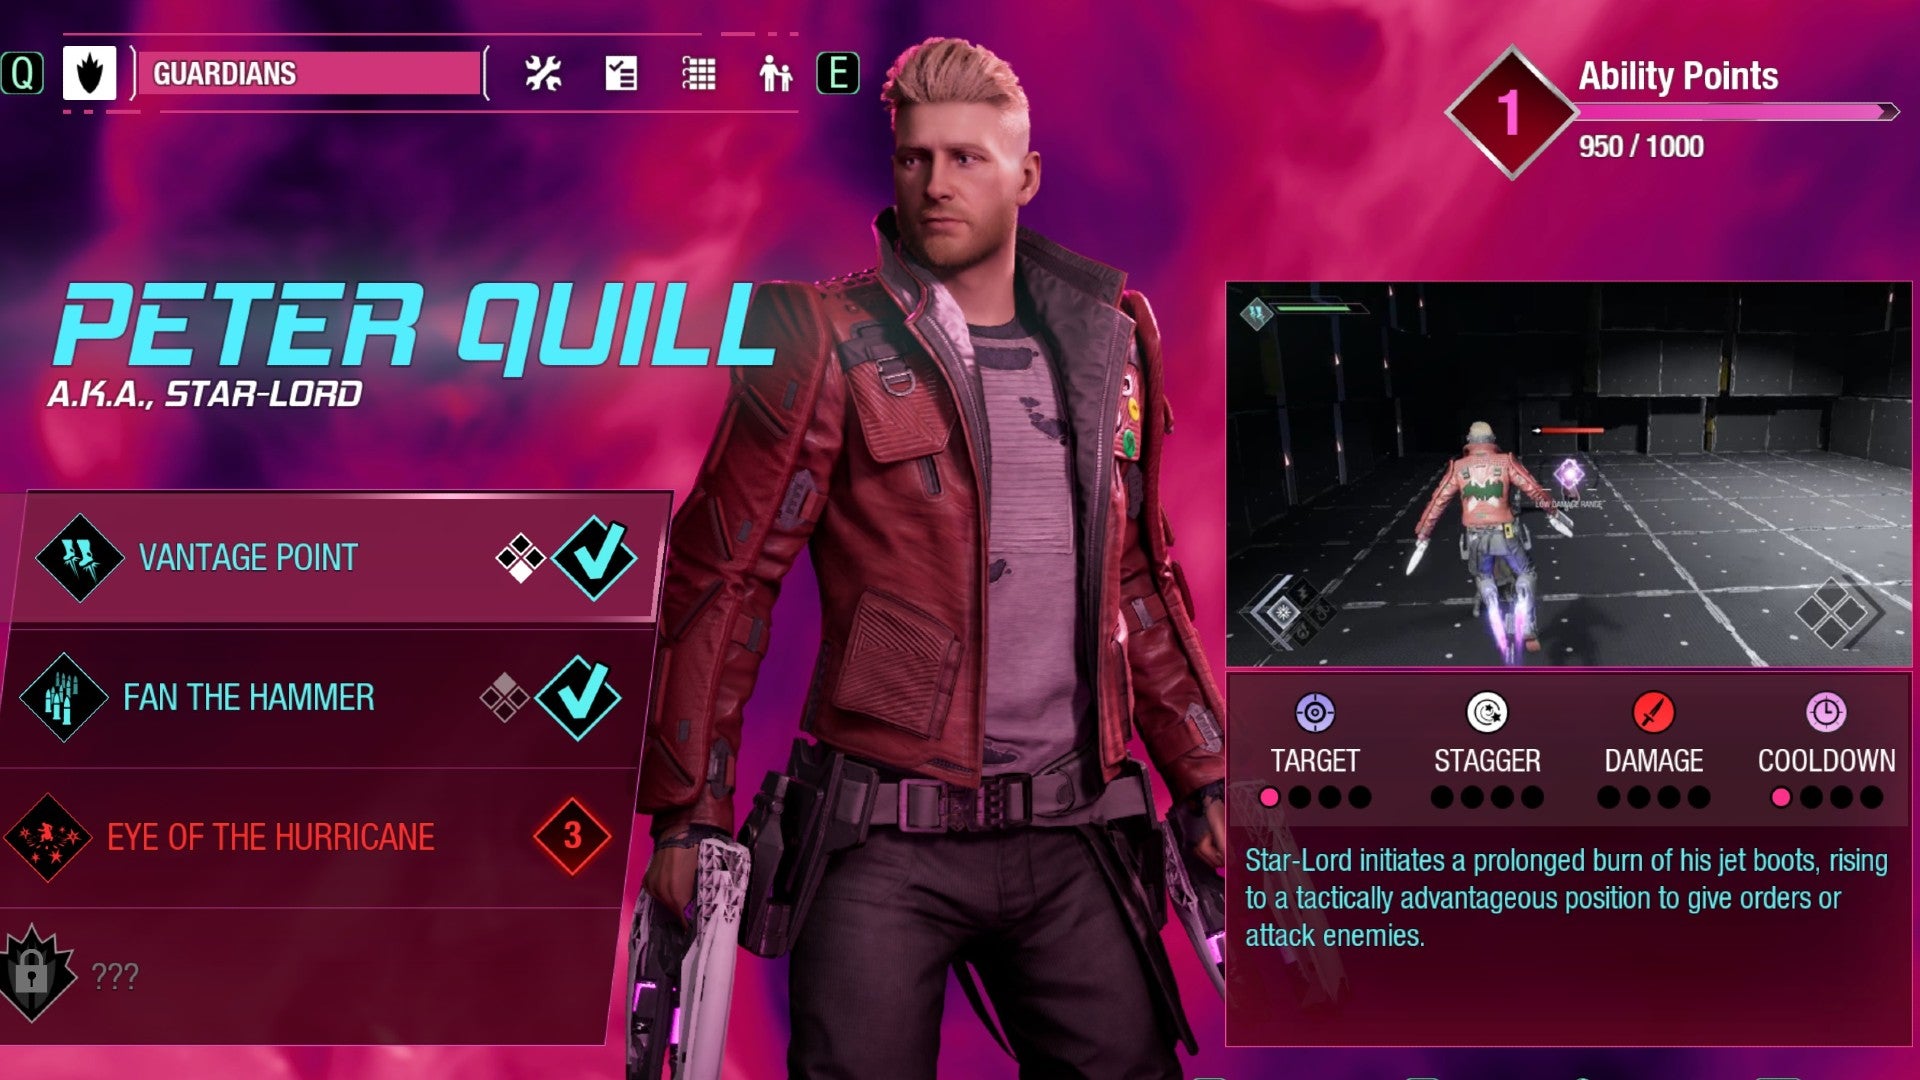 Star-Lord's ability menu in Guardians Of The Galaxy